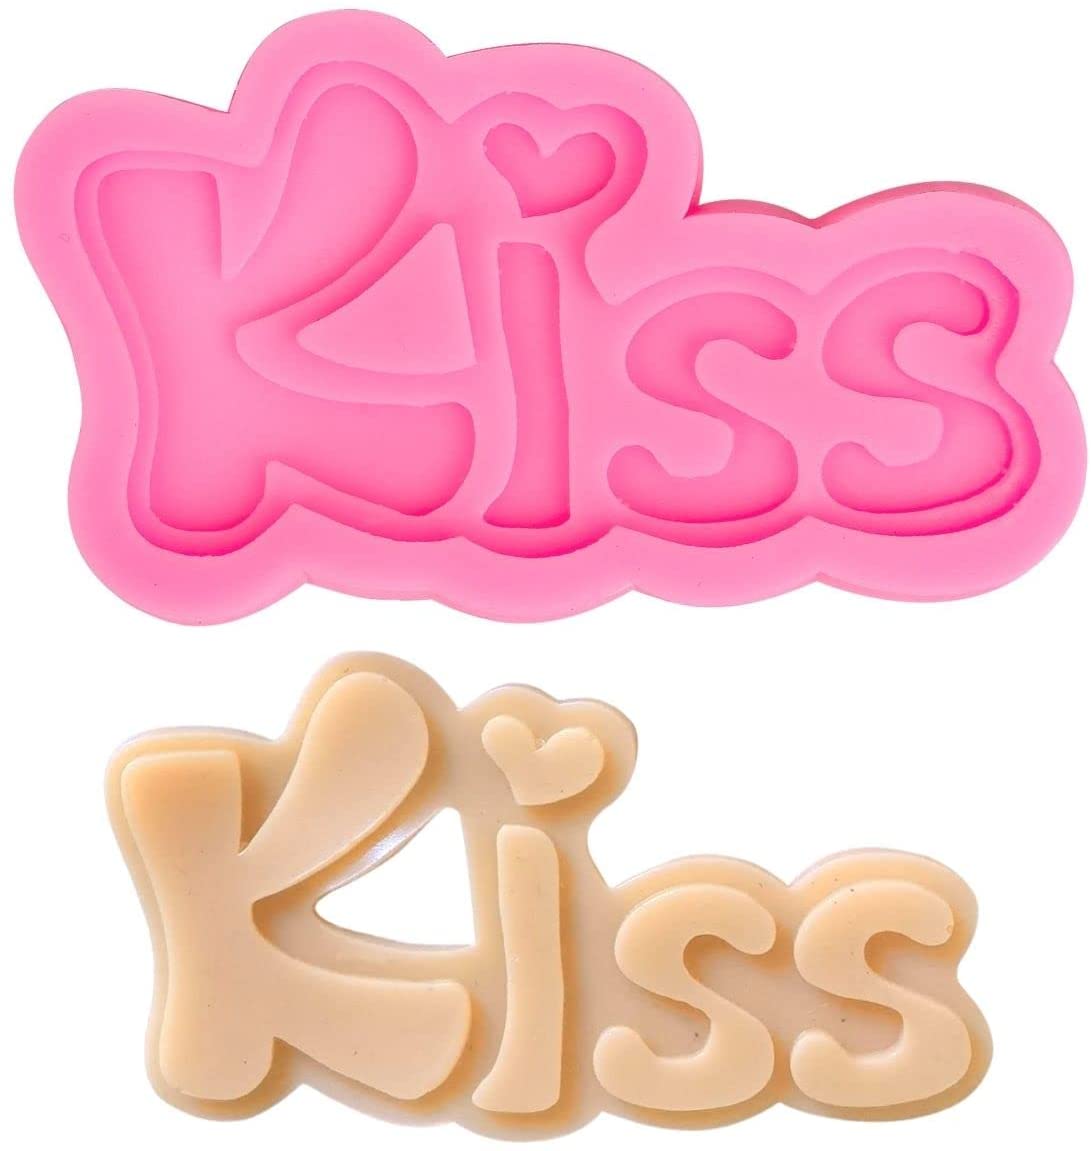 Keepaty Kiss Shape Silicone Chocolate Moulds RRP 3.99 CLEARANCE XL 1.99